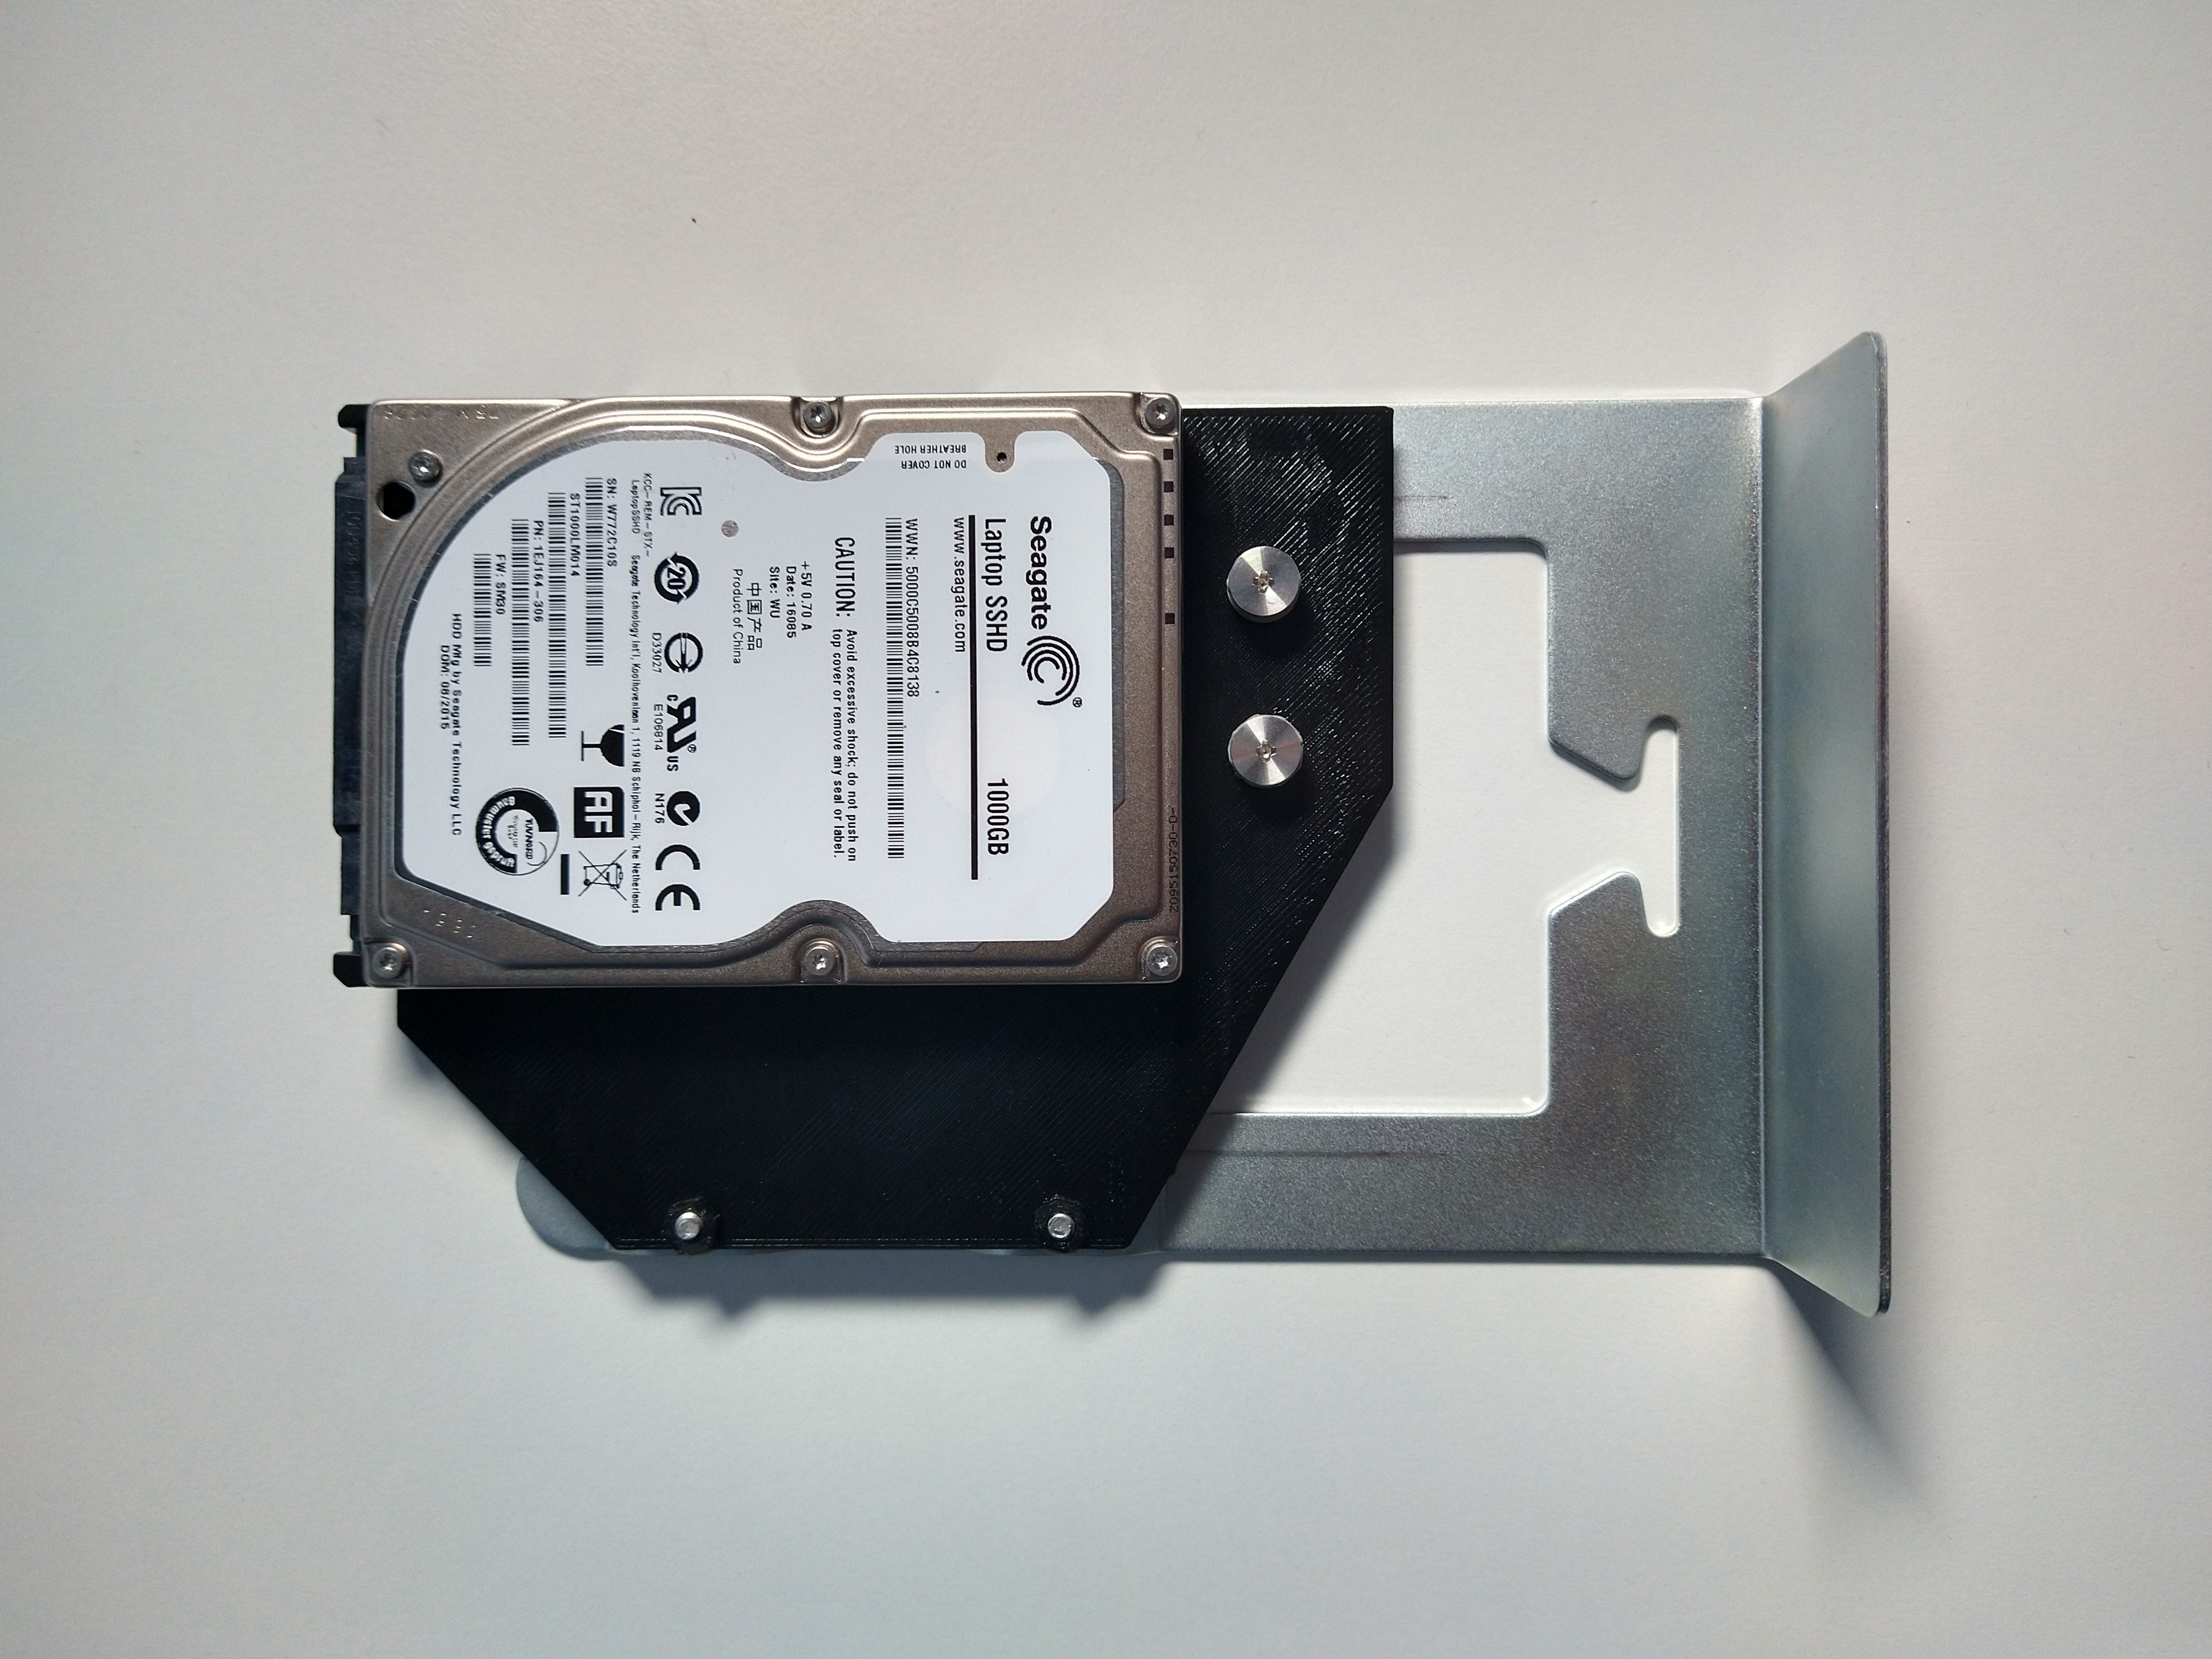 Apple Mac Pro 3.5" to 2.5" HDD/SSD mount adapter